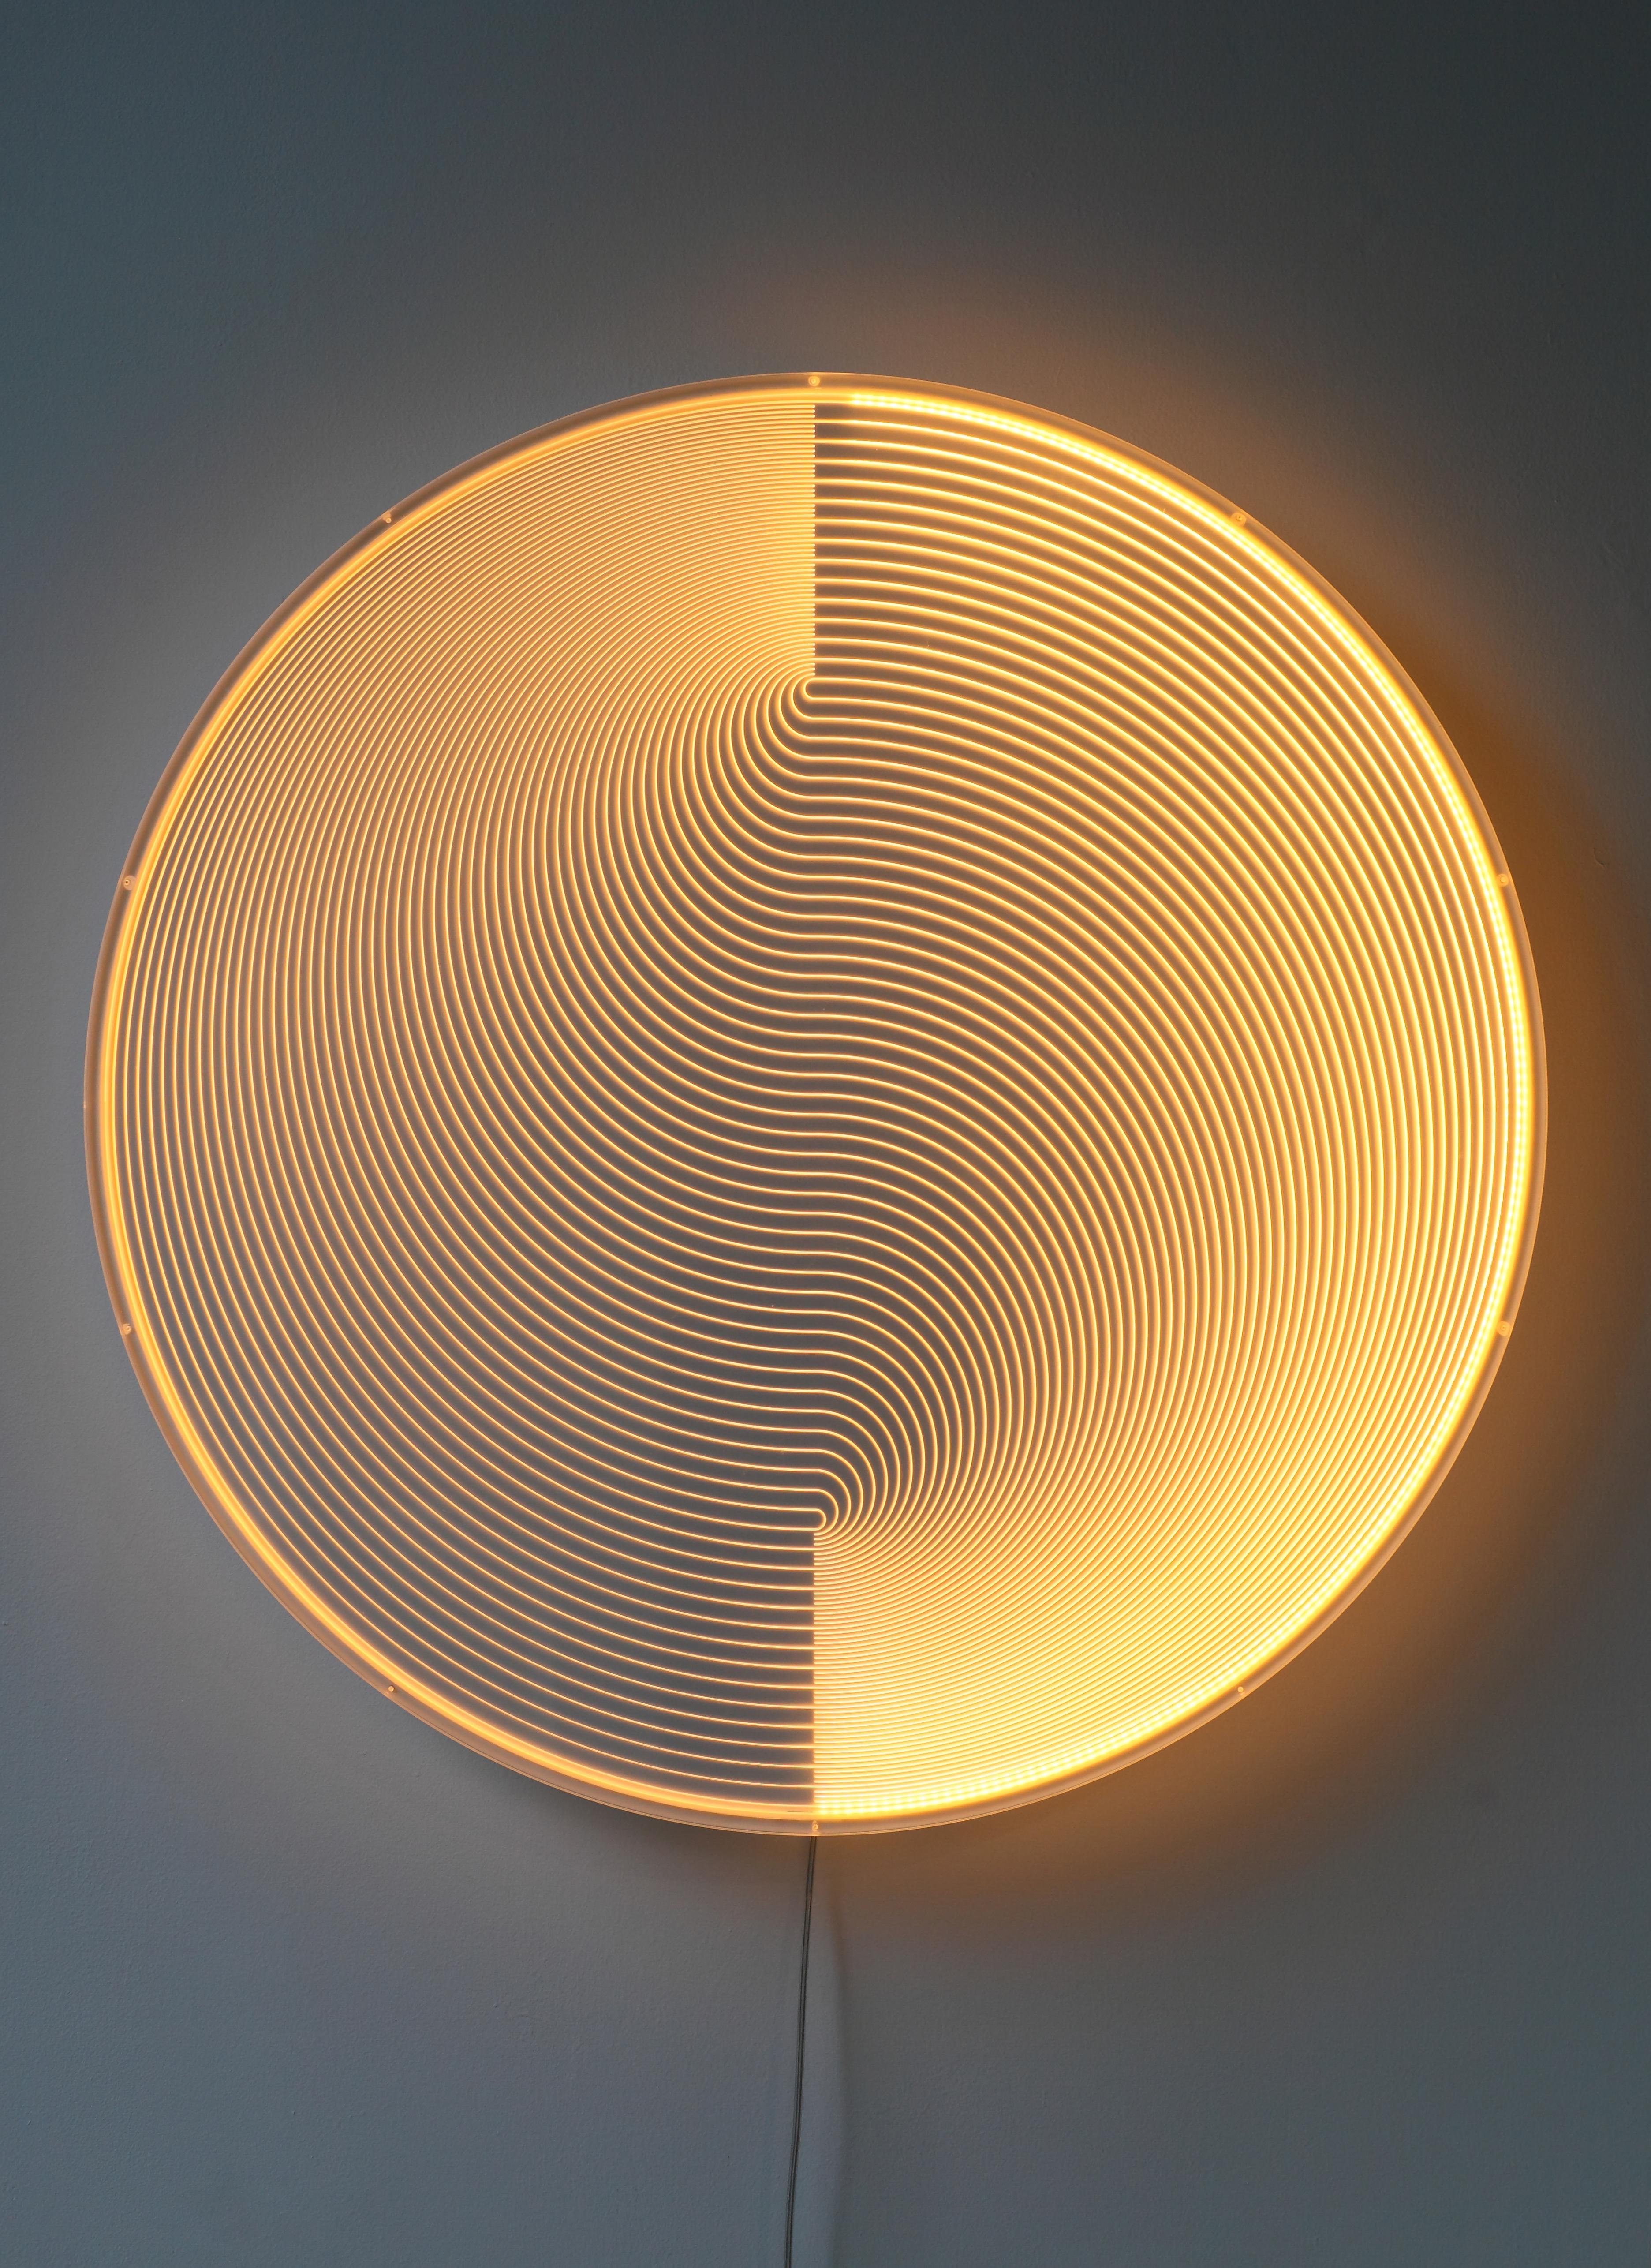 The emitting sculpture appears as a real-time light paintings, the lines of light seem to be floating in the space. A plate of acrylic glass is engraved with a pattern that creates in illusion of depth. In the same way as in fiber optics the light